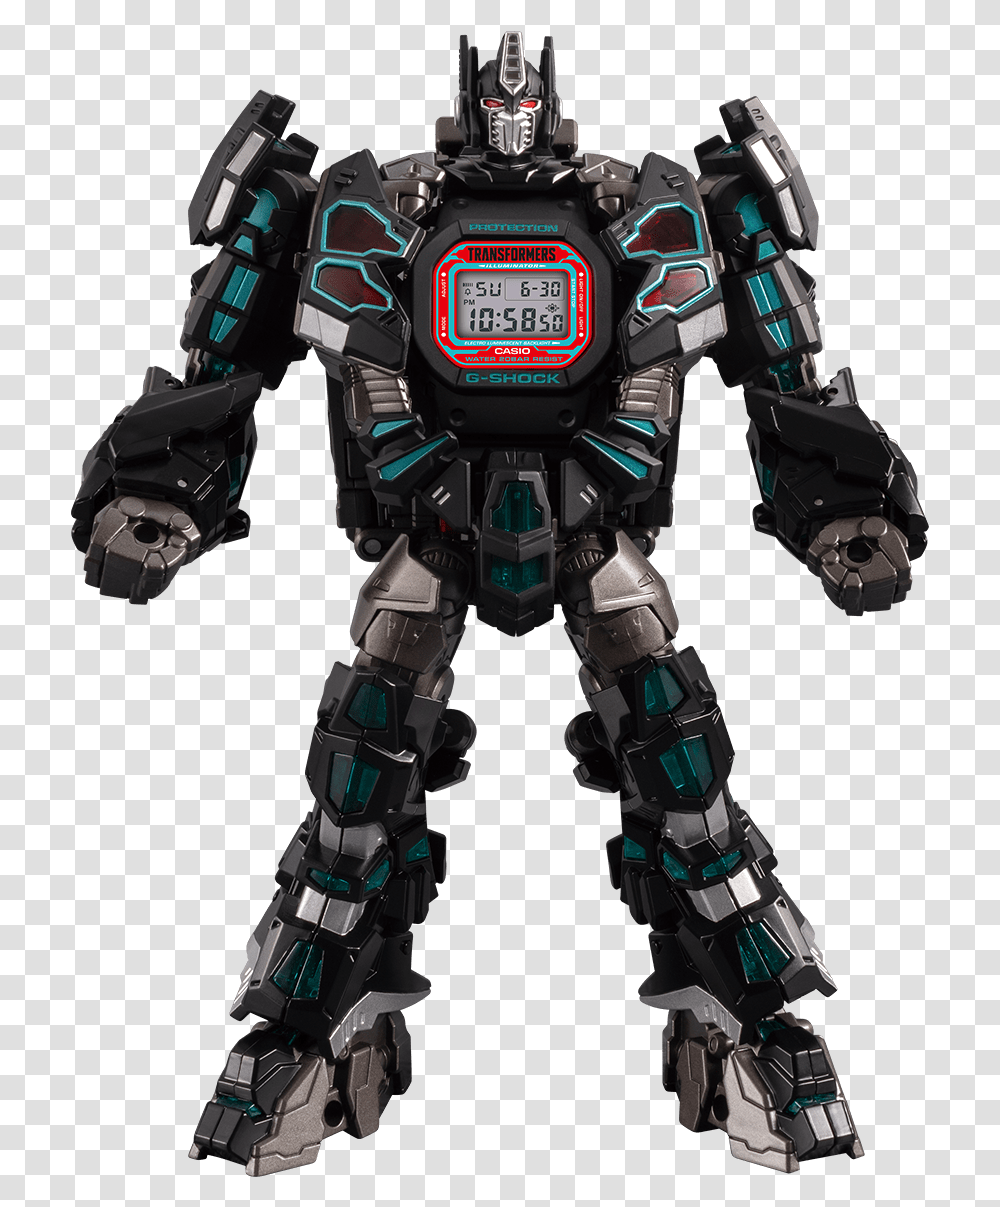 Casio G Shock Transformers, Toy, Robot Transparent Png